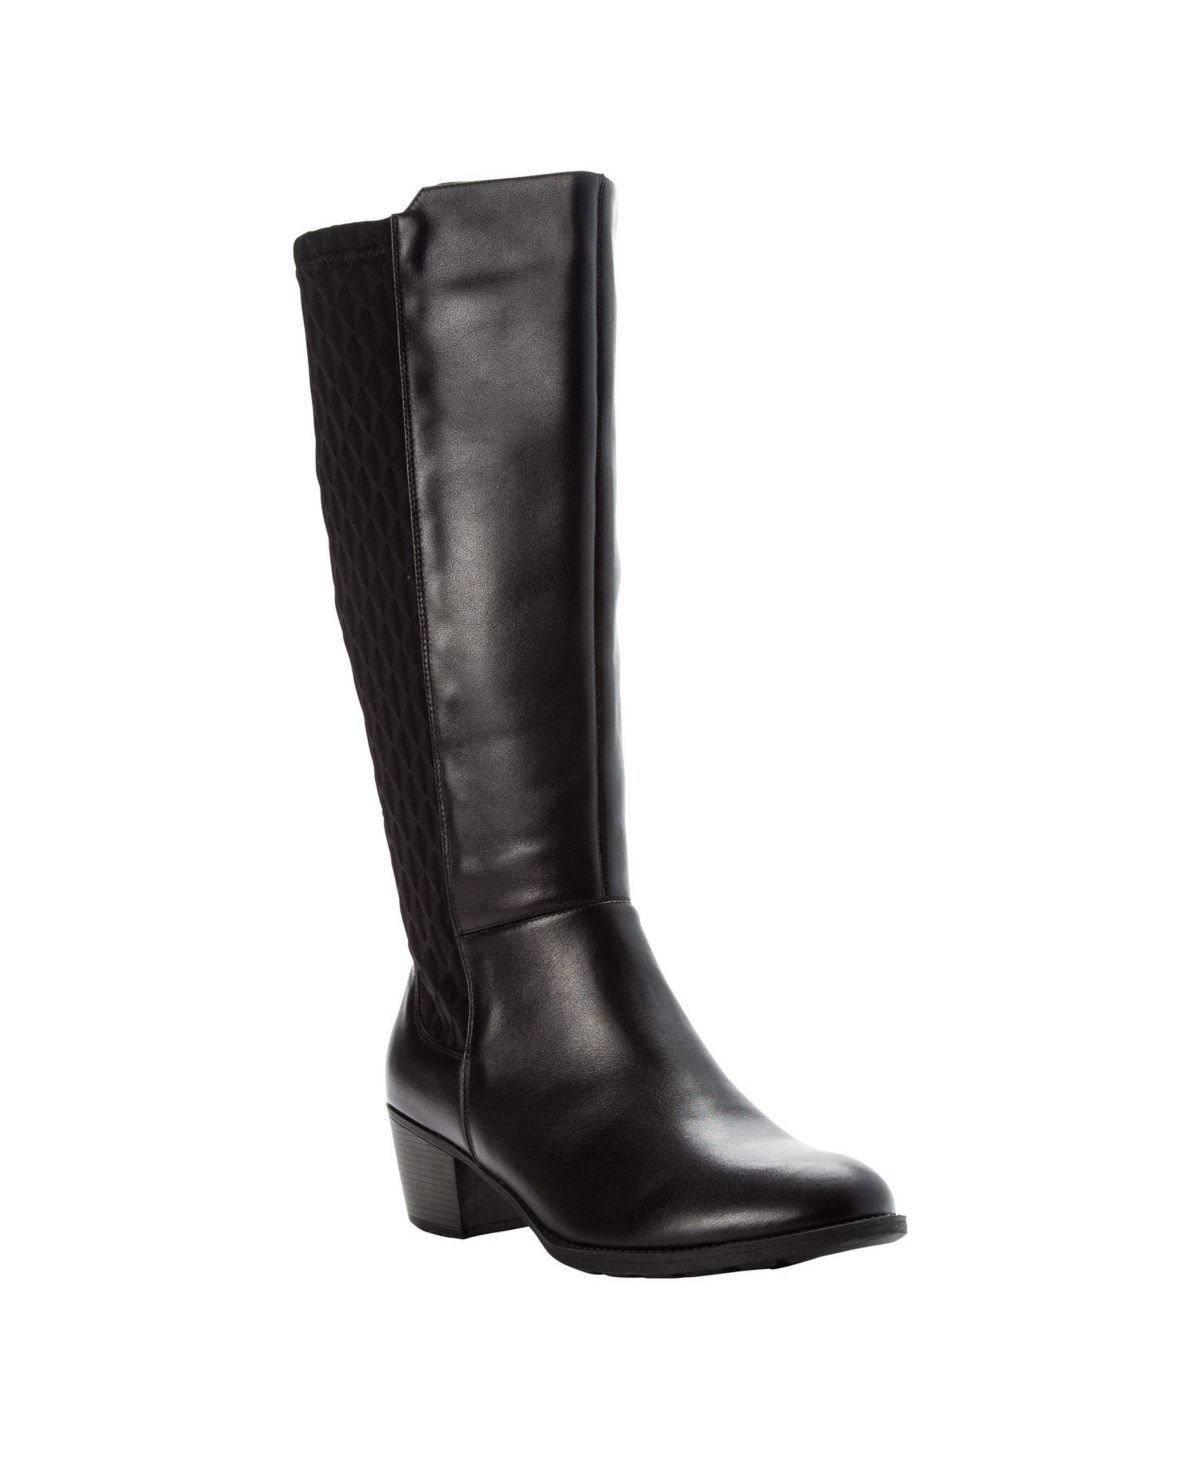 Women's Talise Leather Wide Calf Tall Boots - Black